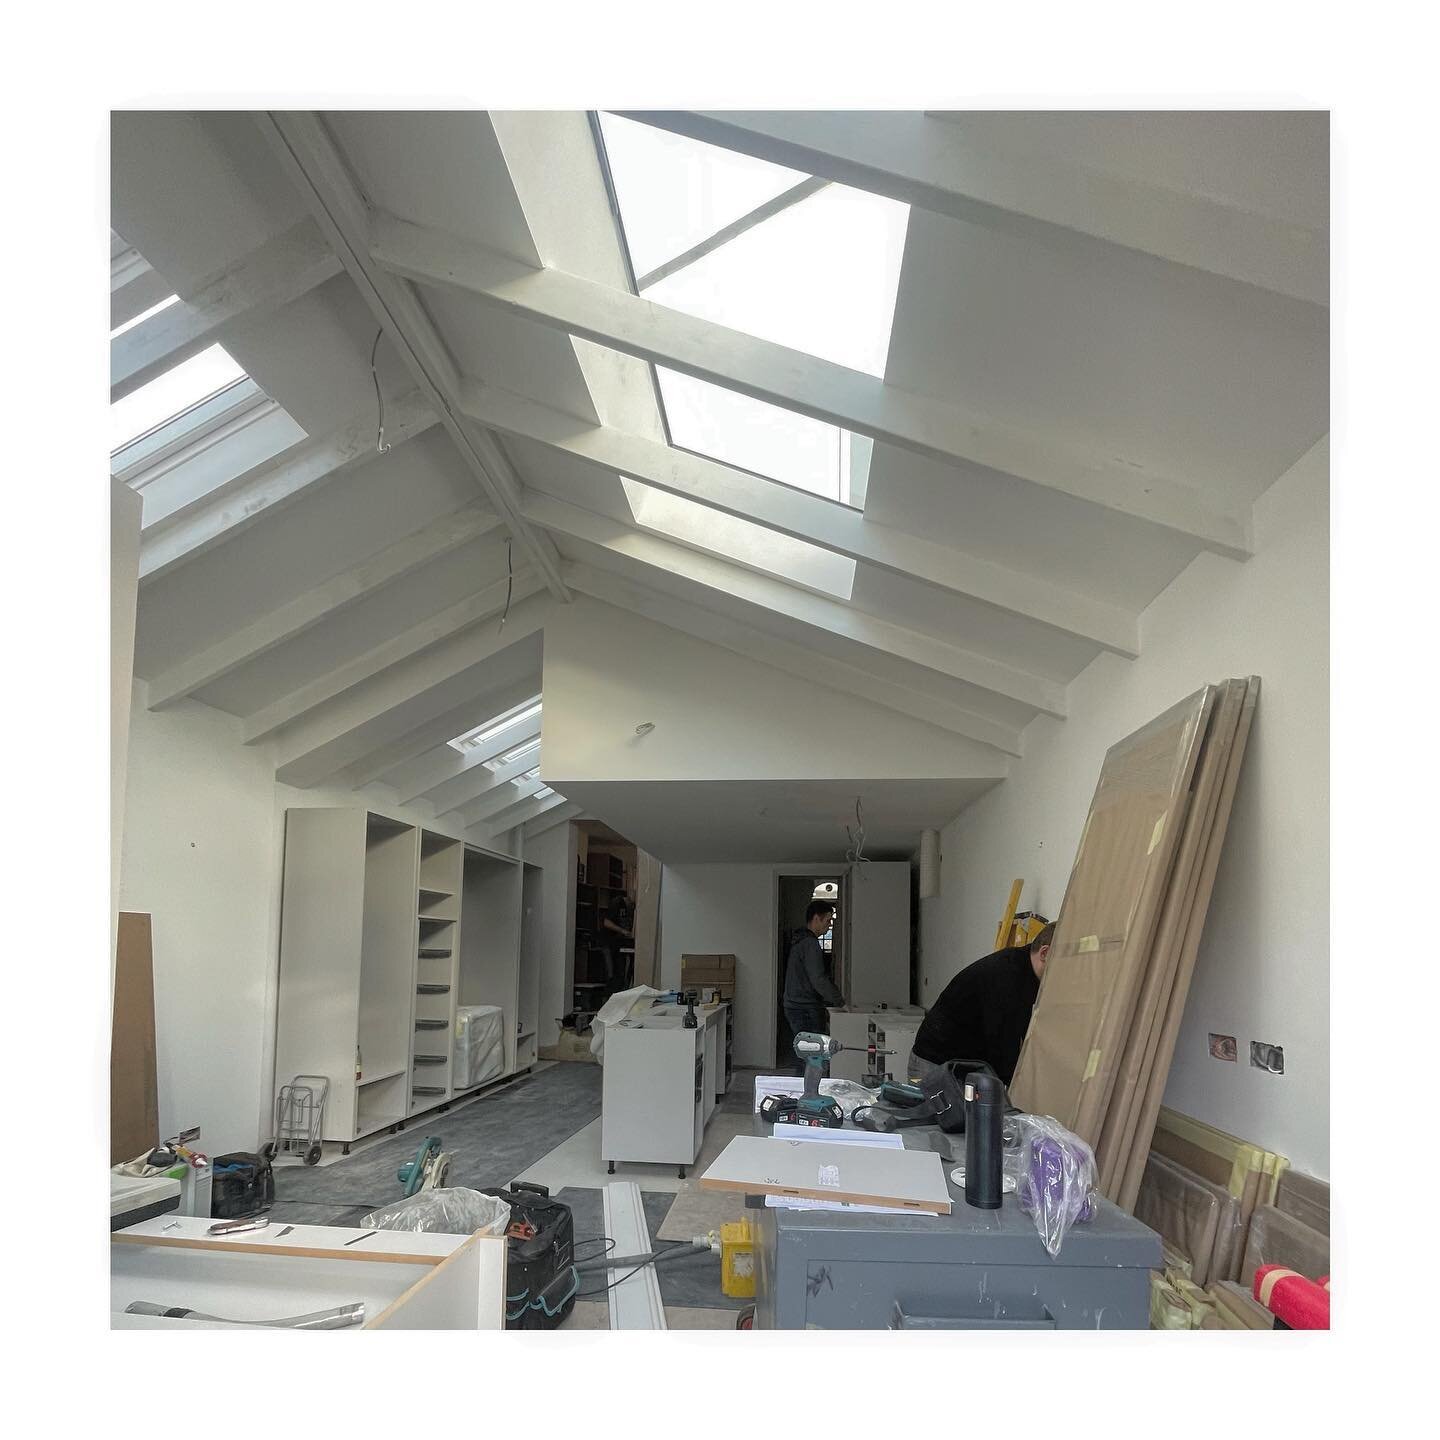 Kitchen incoming. Another bespoke kitchen extension to suit another special client. Watch this space for colour. I can hardly begin to explain the transformation that has been made here and cannot wait for it to be handed back to be a home again ❣️🏡